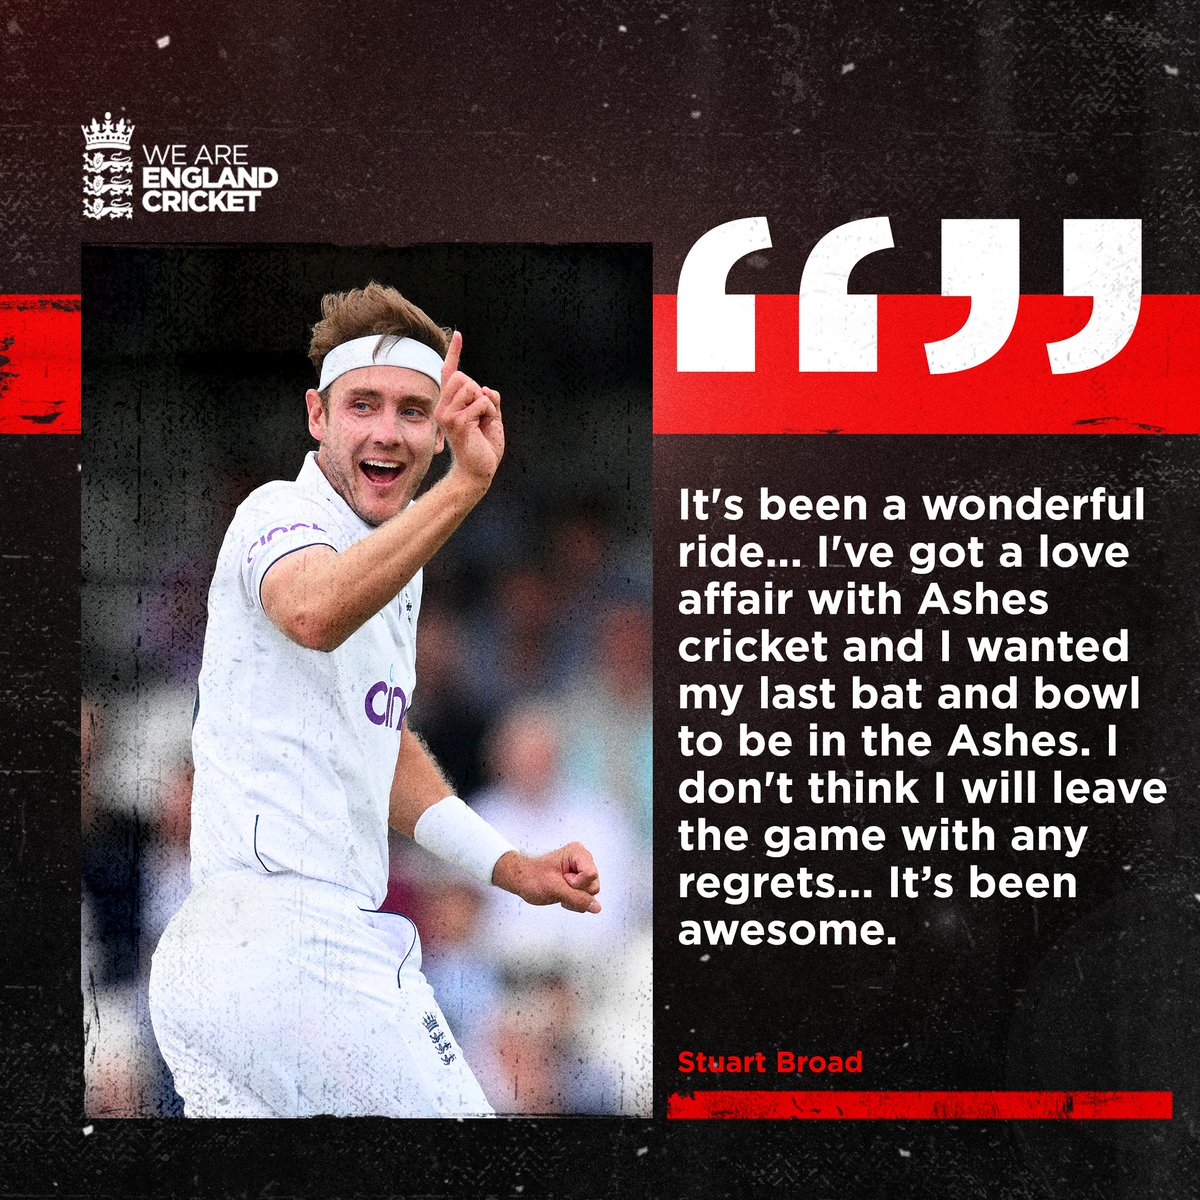 Stuart, it's been an honour 🤝 We wish you all the best in whatever you decide to do next ❤️ #EnglandCricket | #Ashes